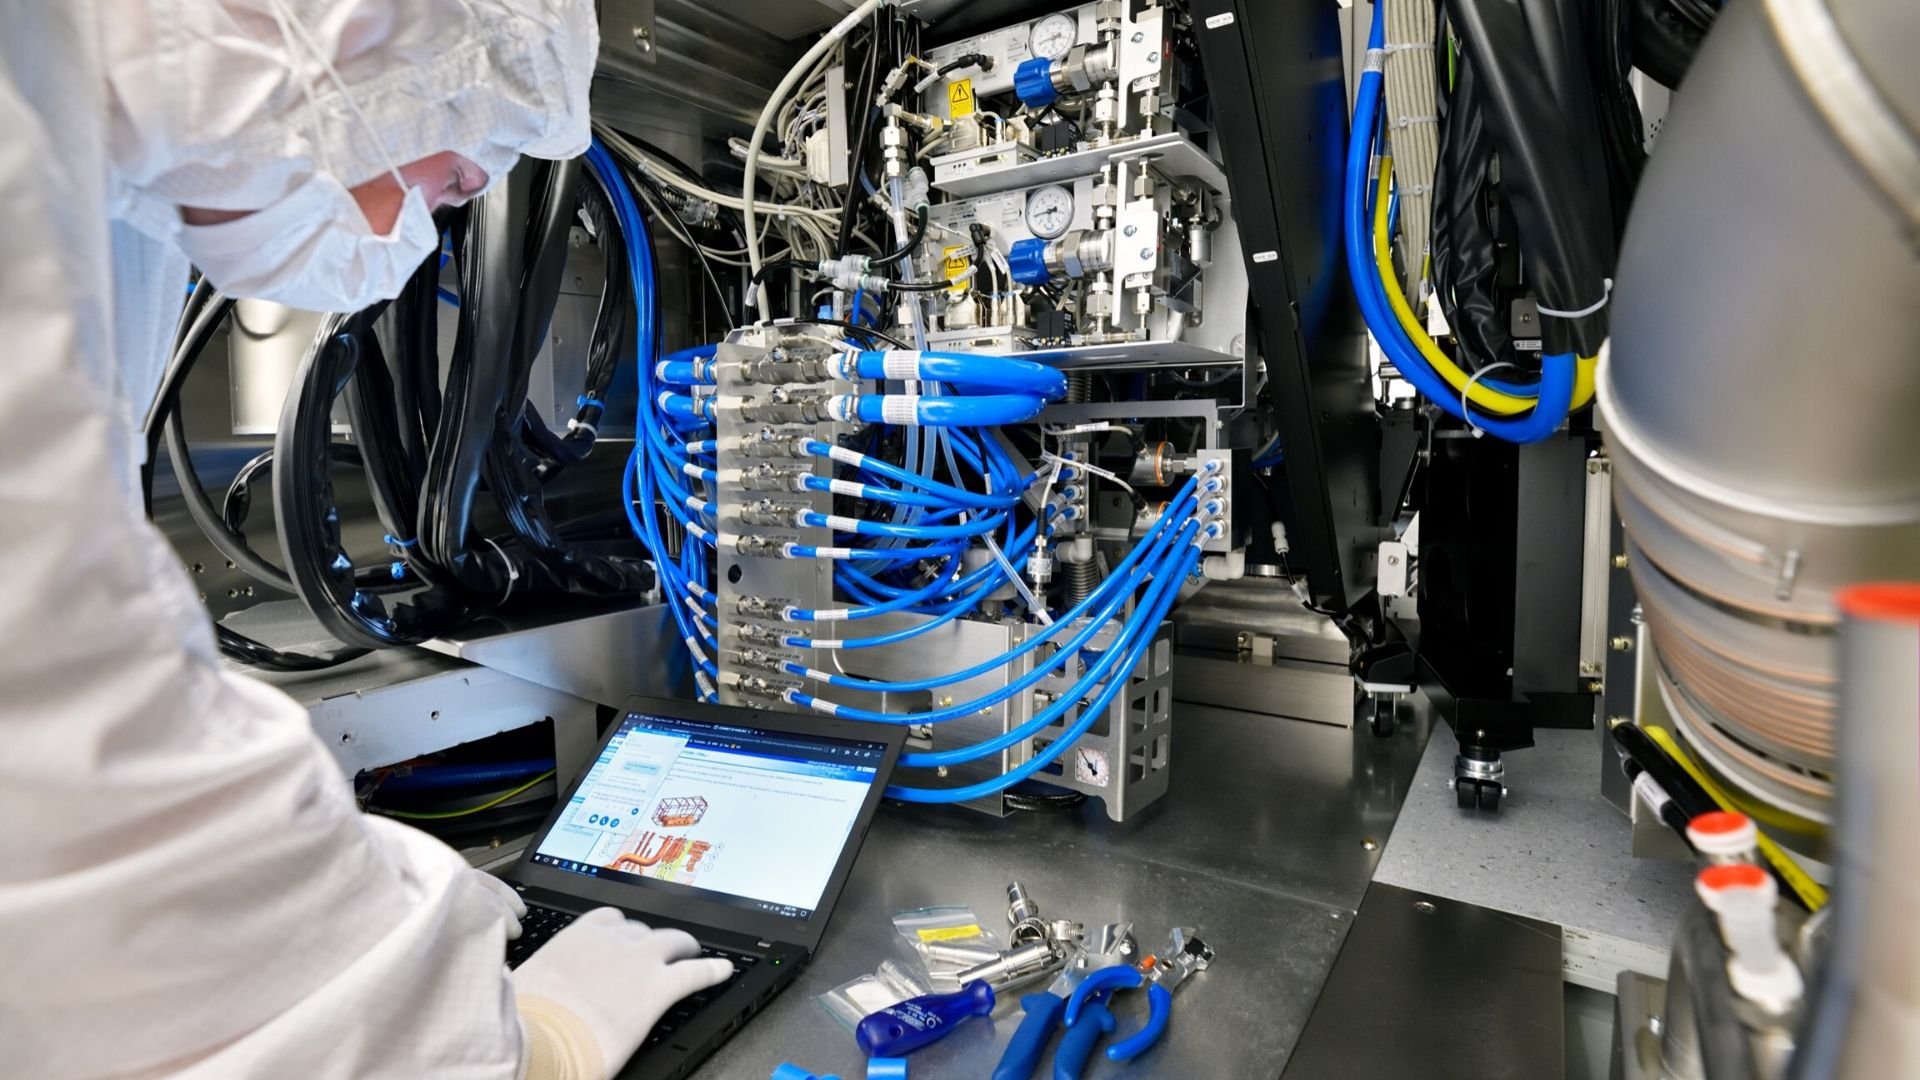 An ASML EUV customer support engineer troubleshoots a machine inside a cleanroom